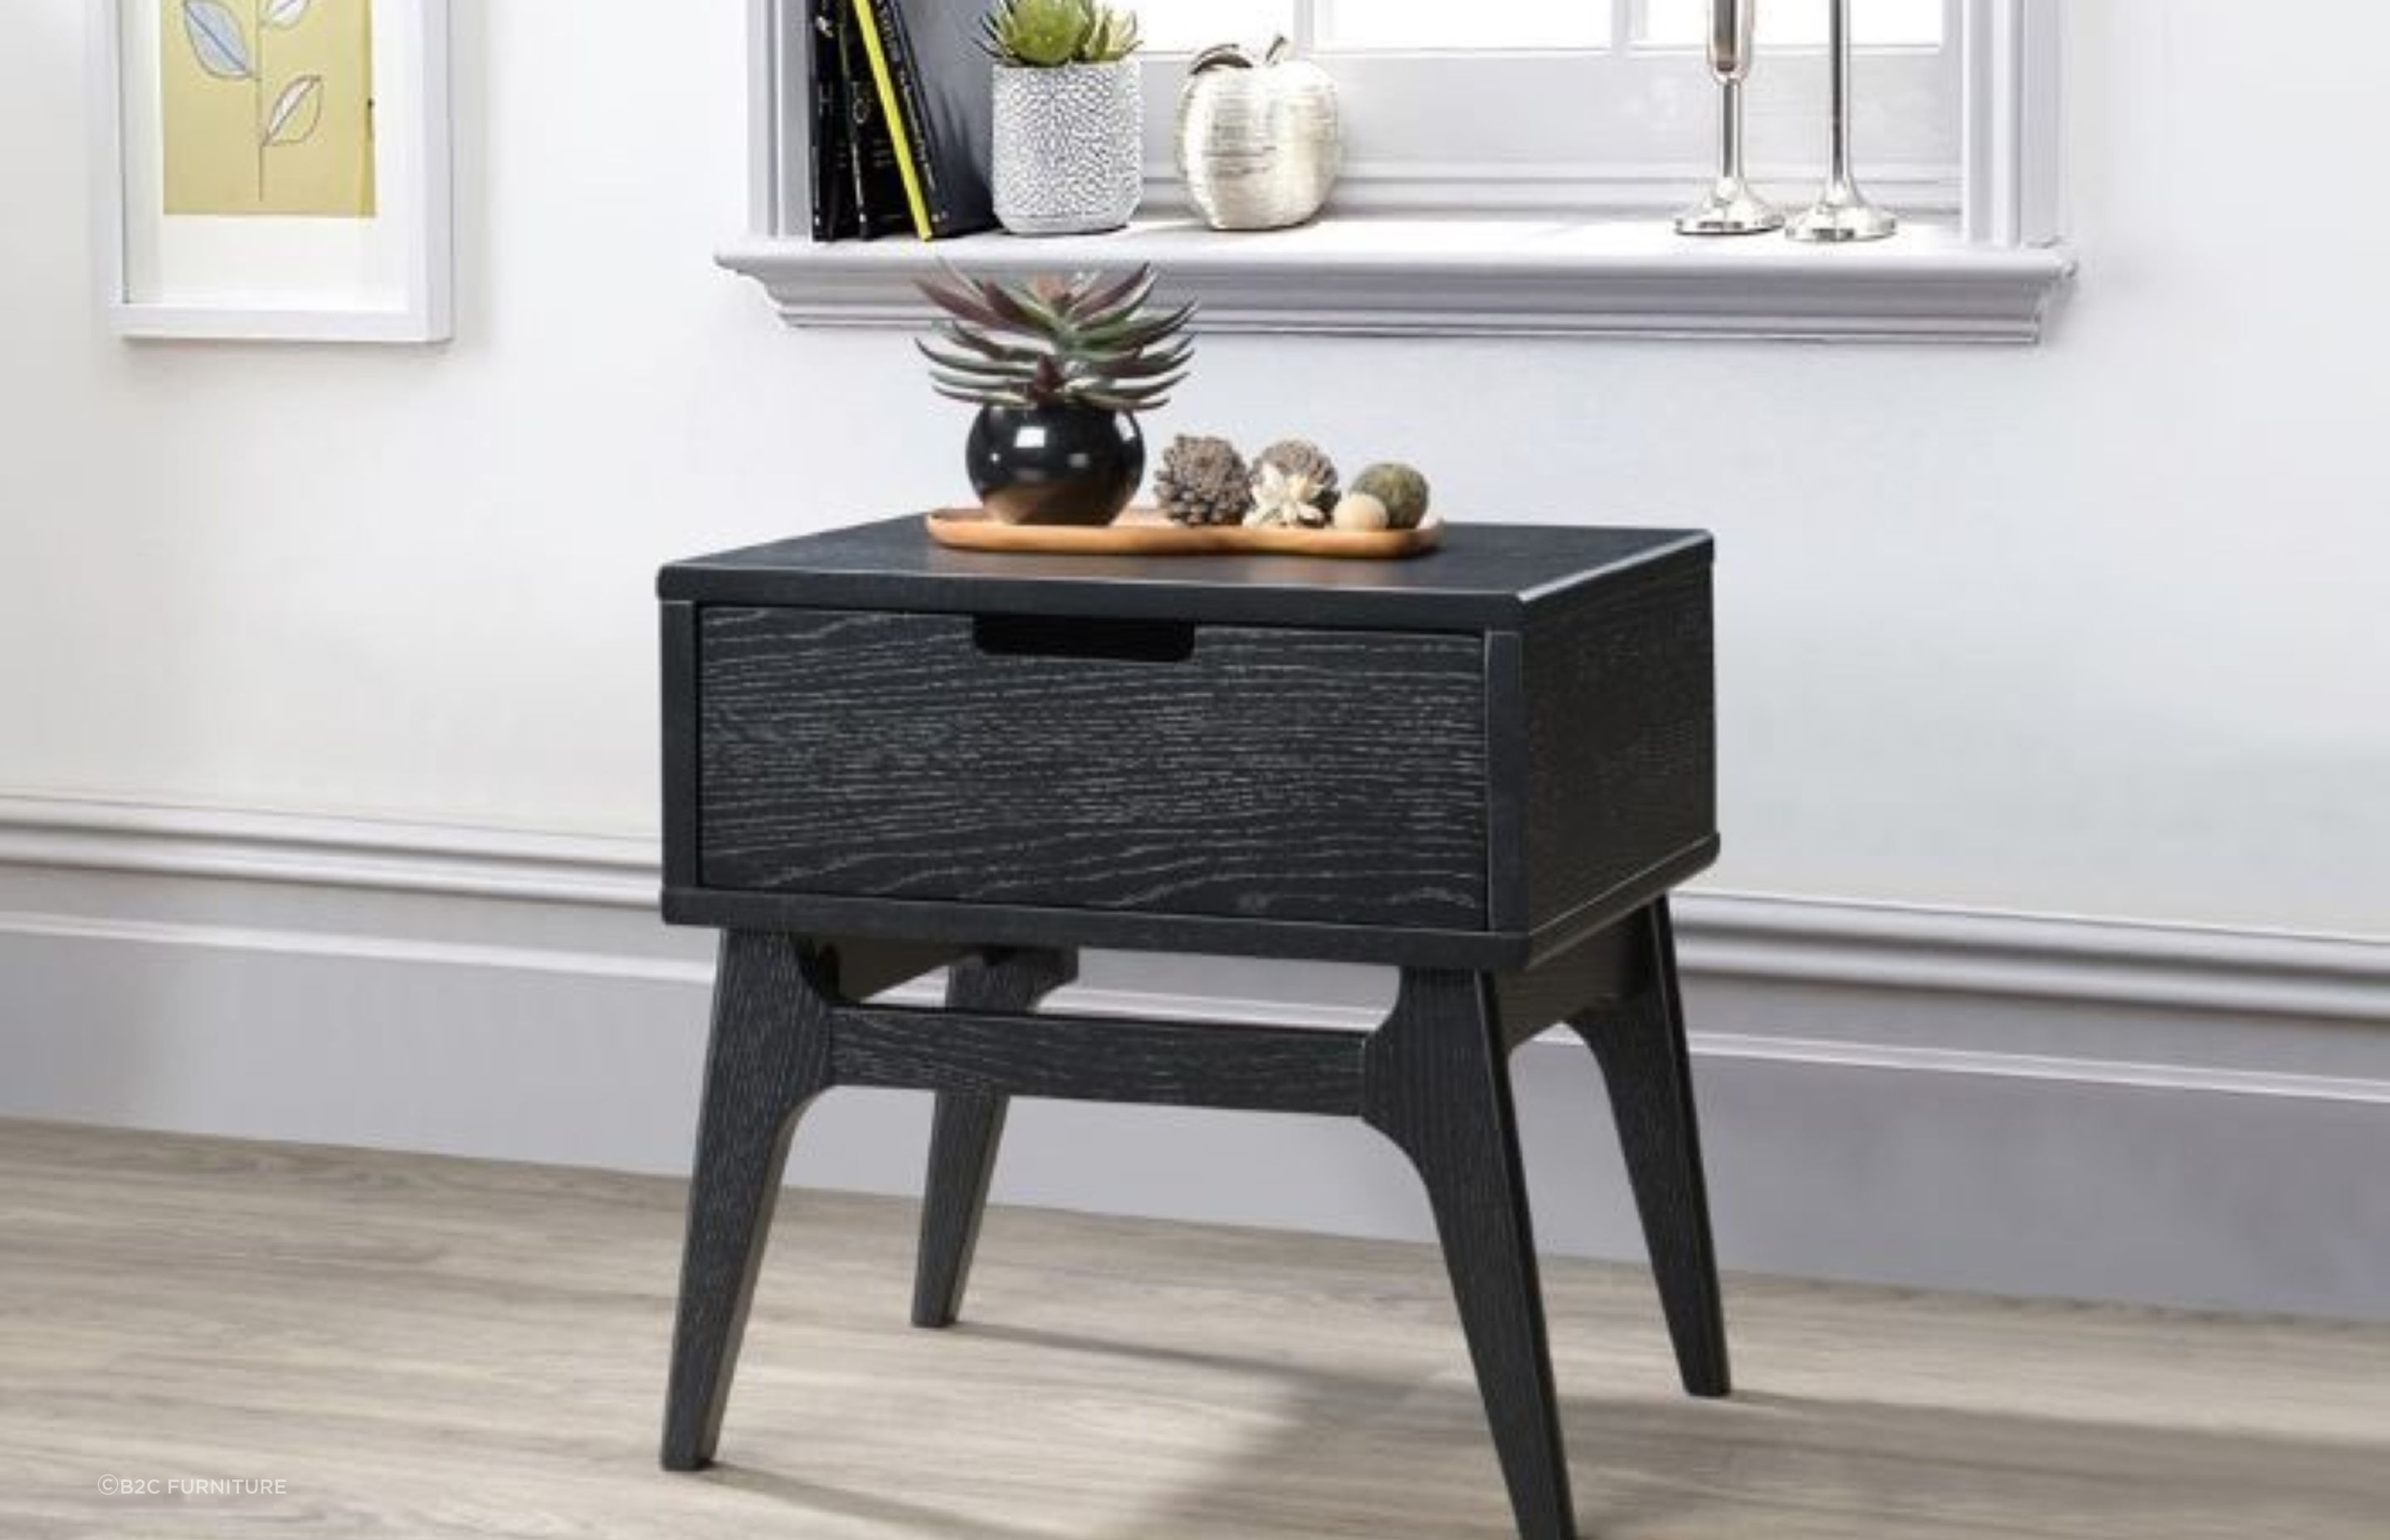 Hardwood side tables, such as this Paris Hardwood Bedside Table, are popular due to their durability and sturdiness.